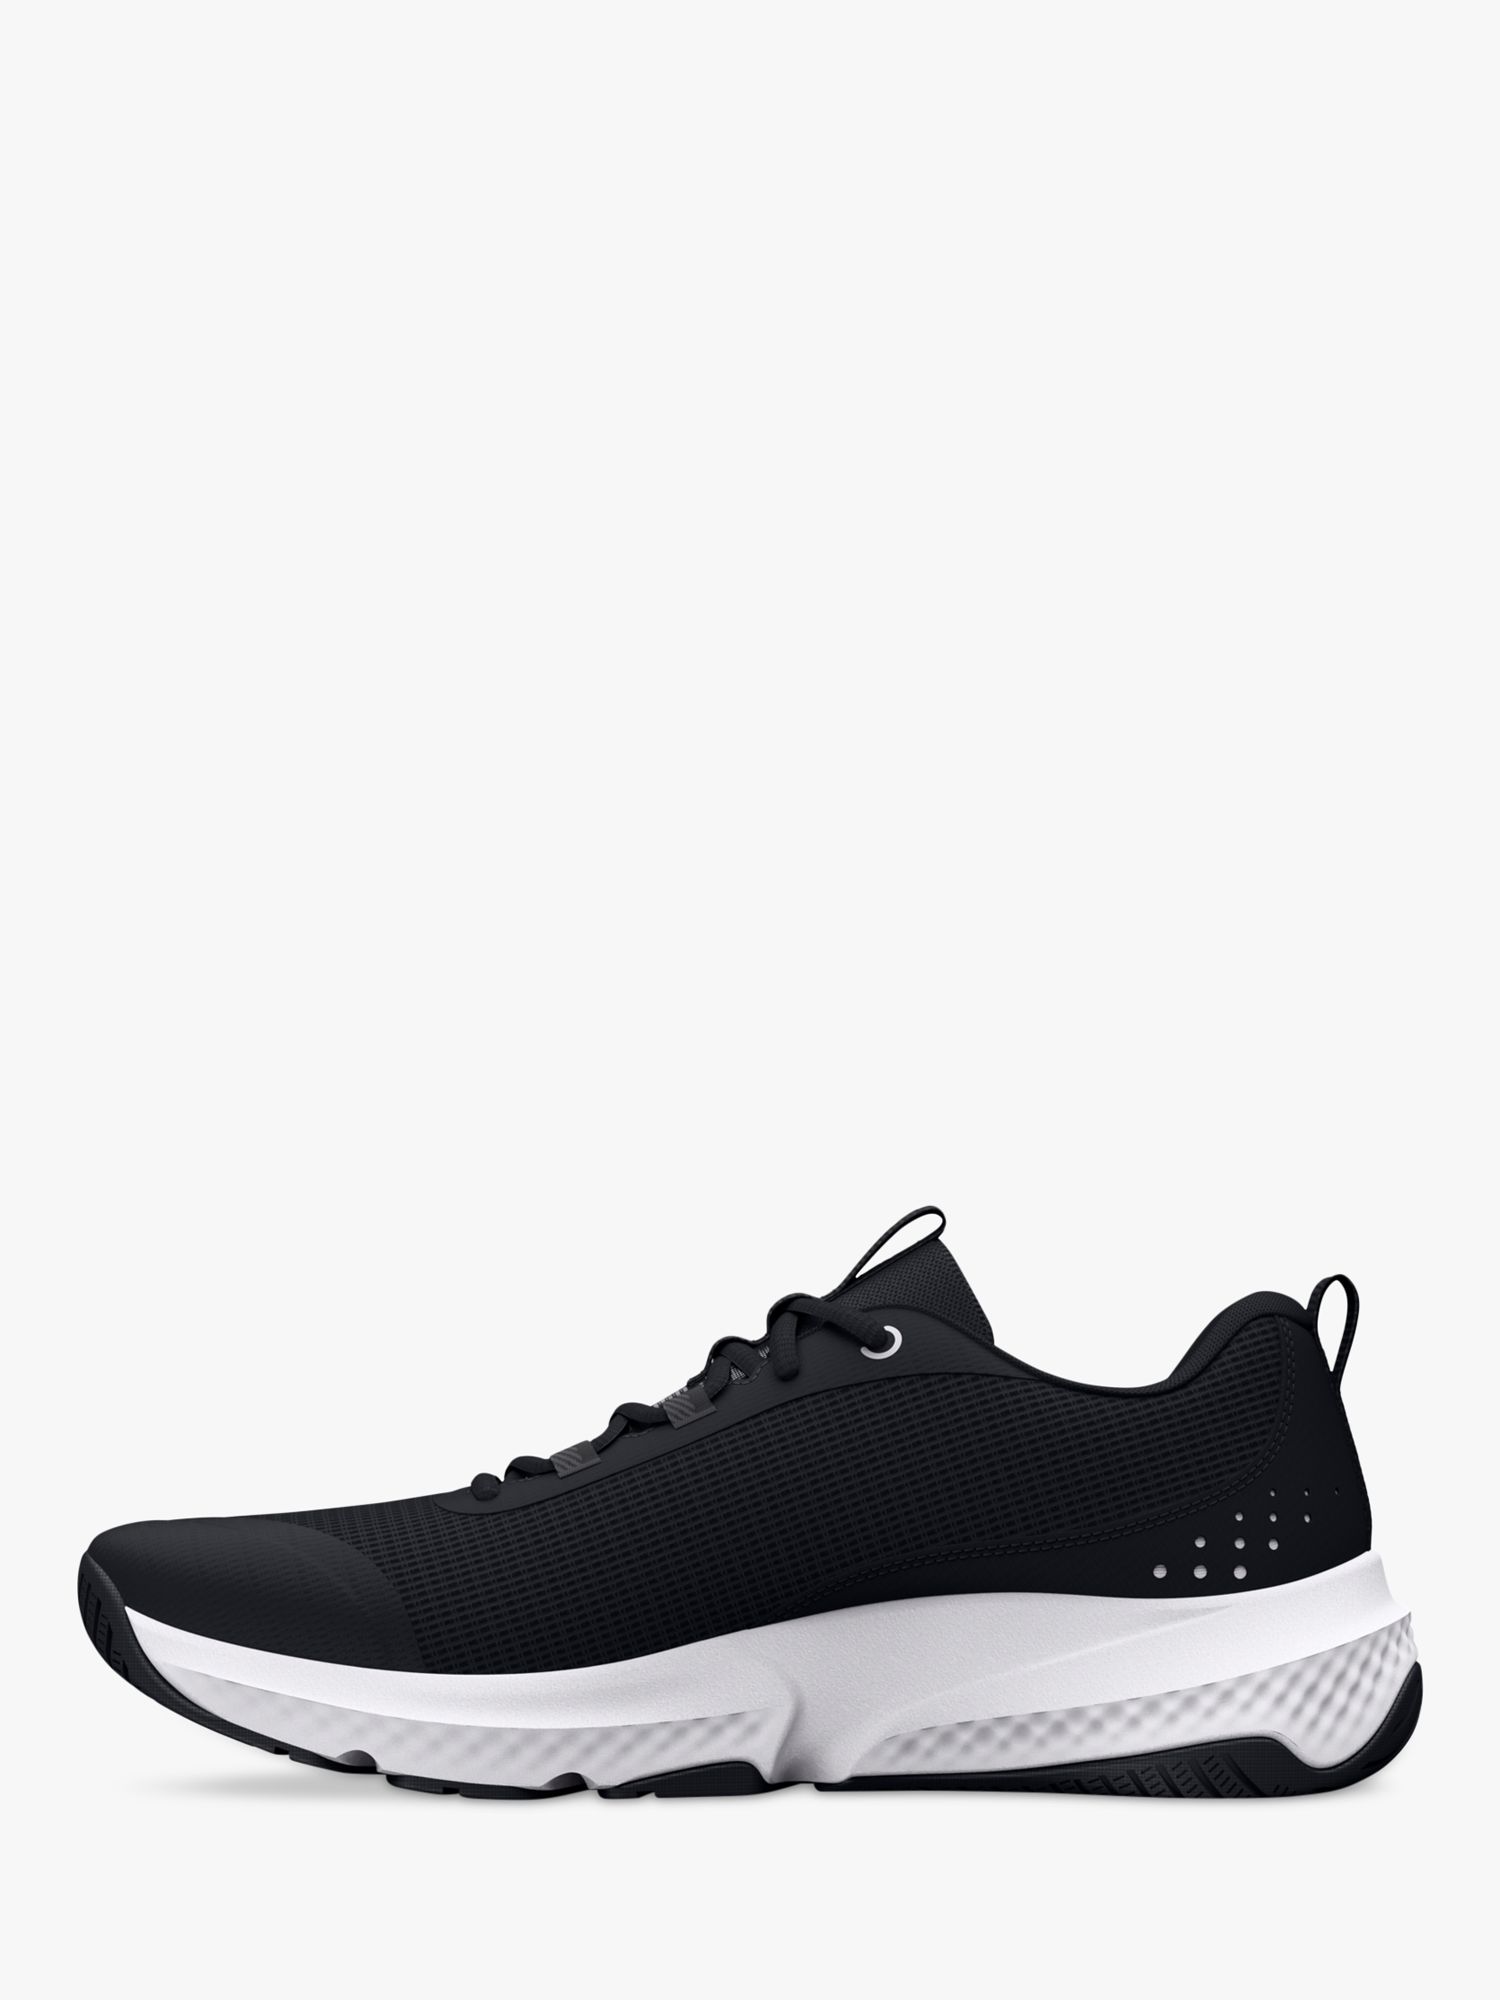 Under Armour Dynamic Select Men's Cross Trainers, Black/White at John ...